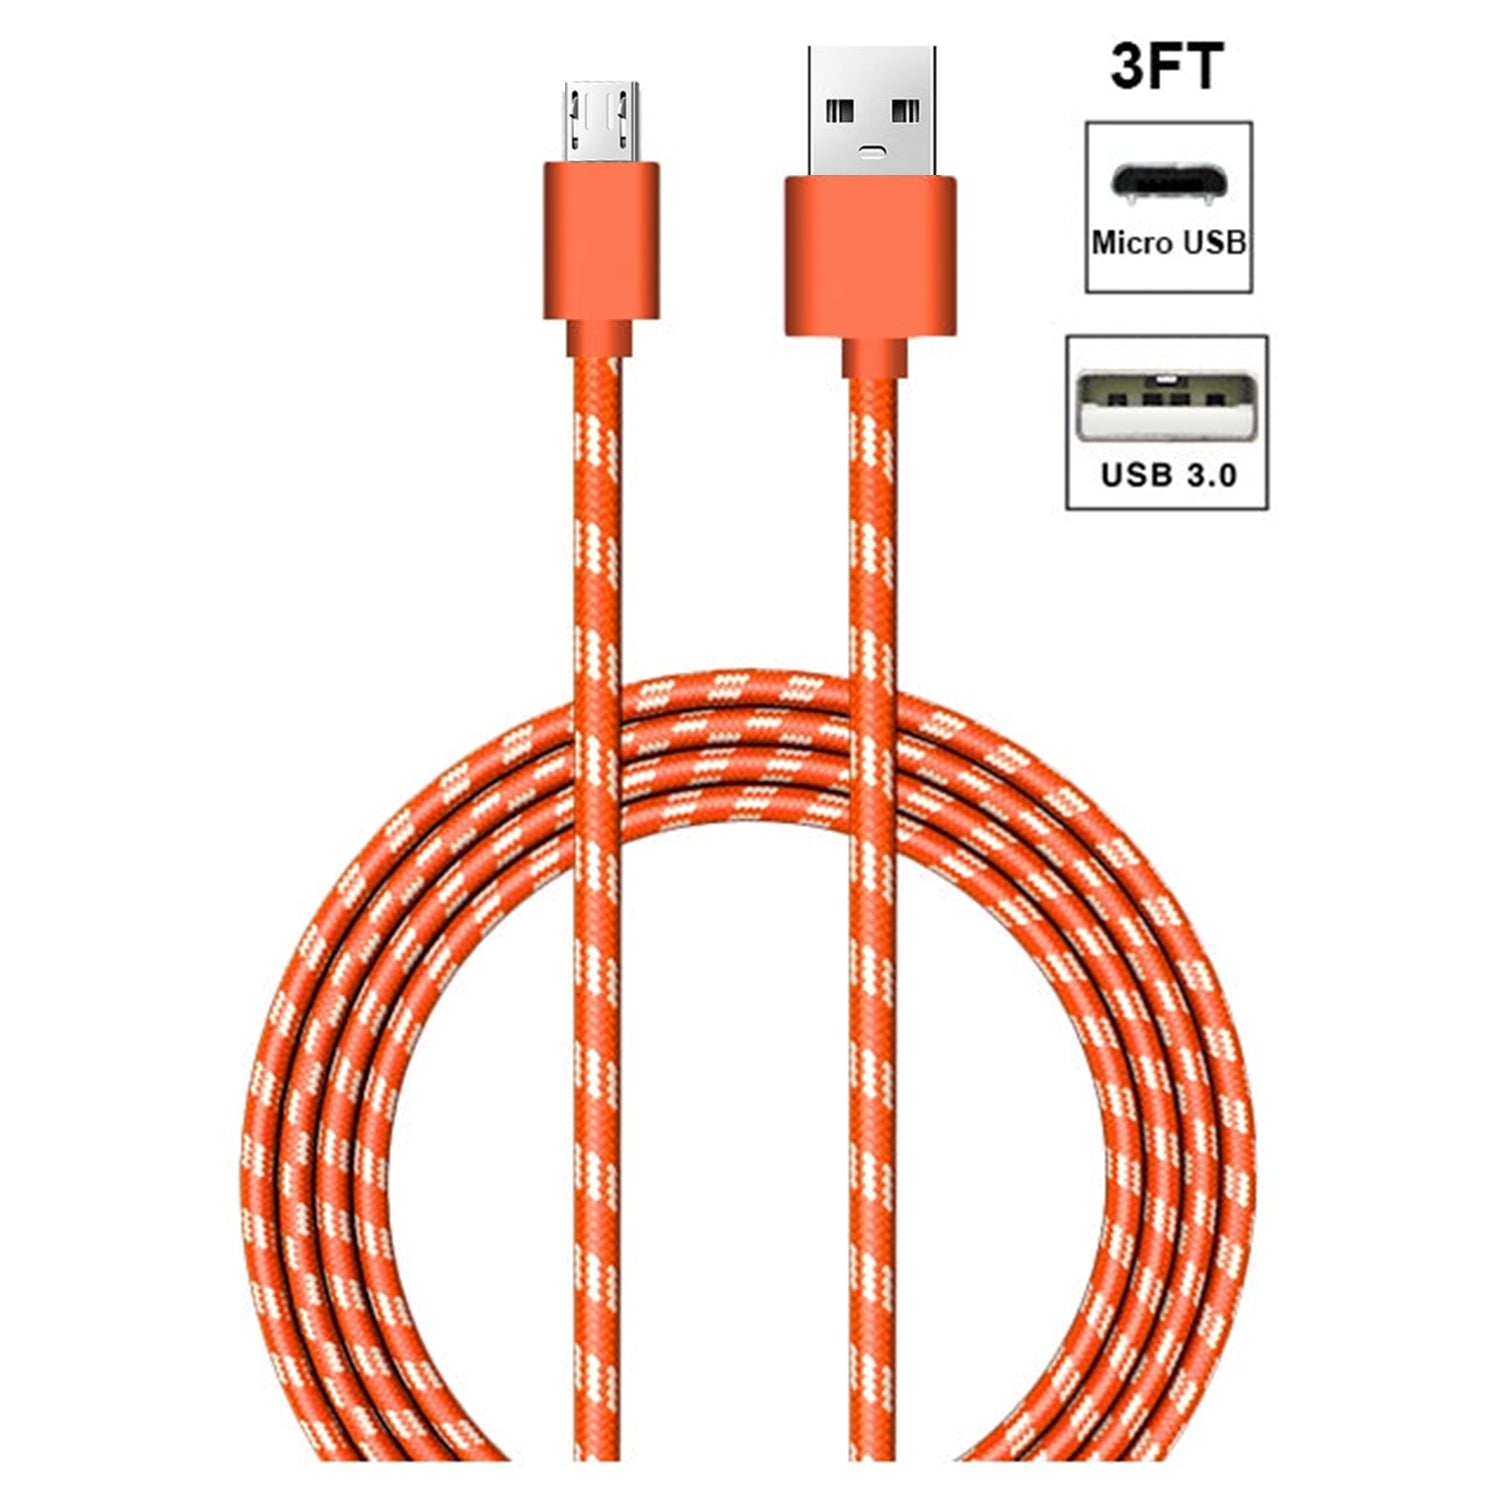 Woven Braided Cable for Samsung Products (3FT)